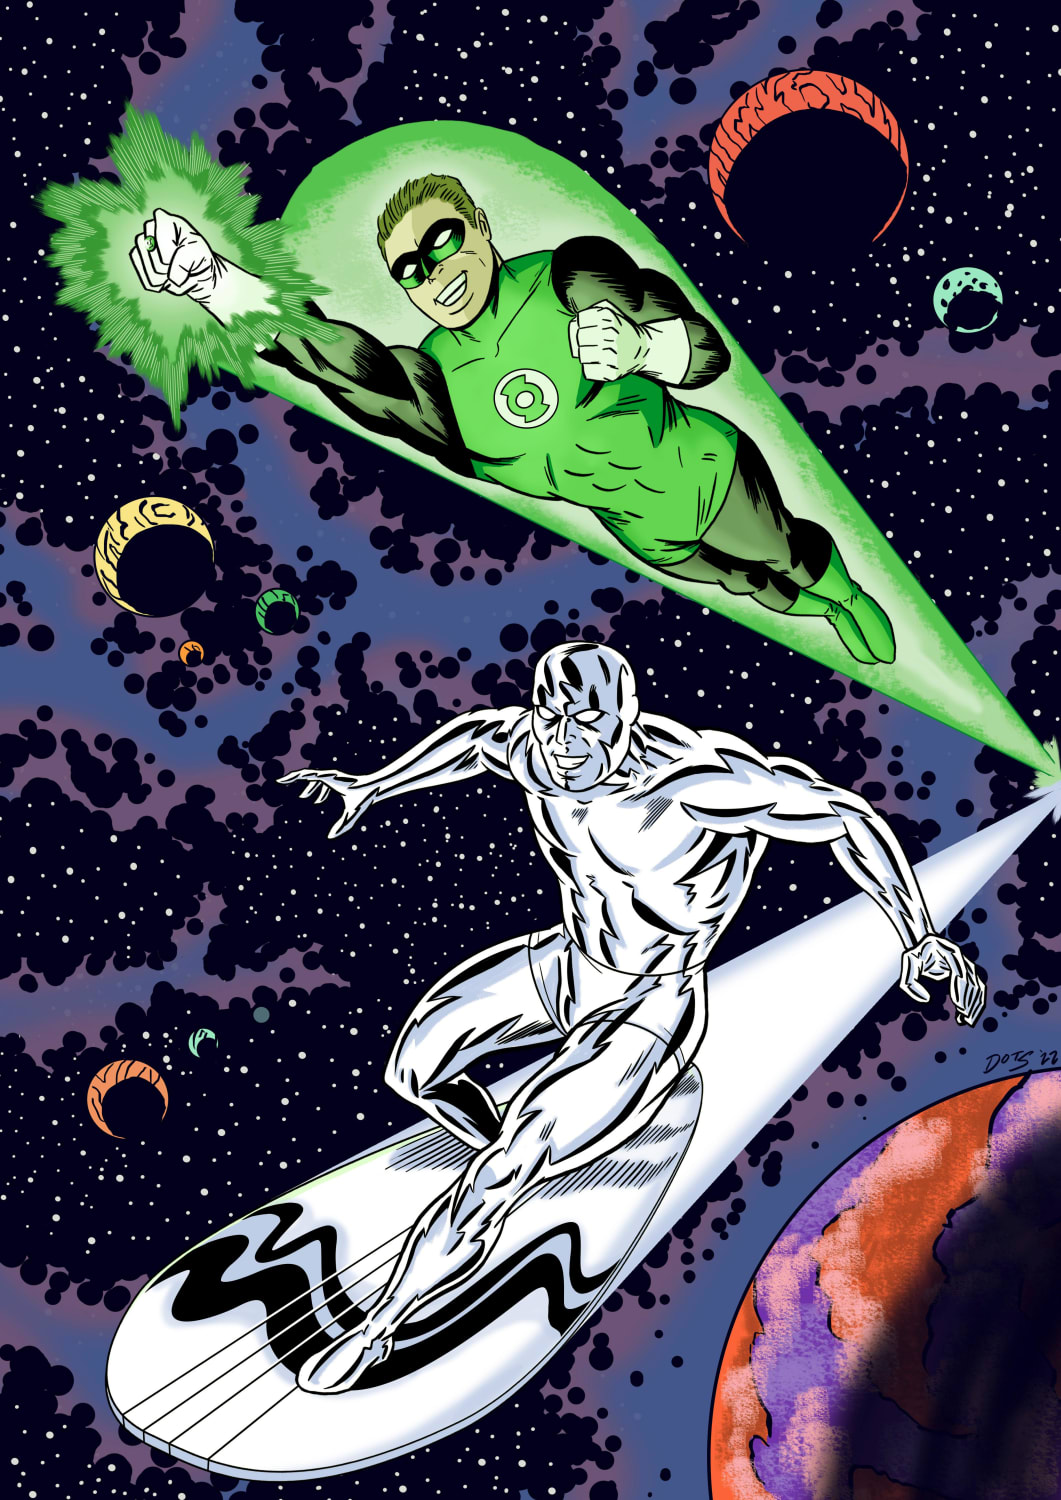 [Fan Art] Green Lantern and the Silver Surfer. By me. hope you like it.